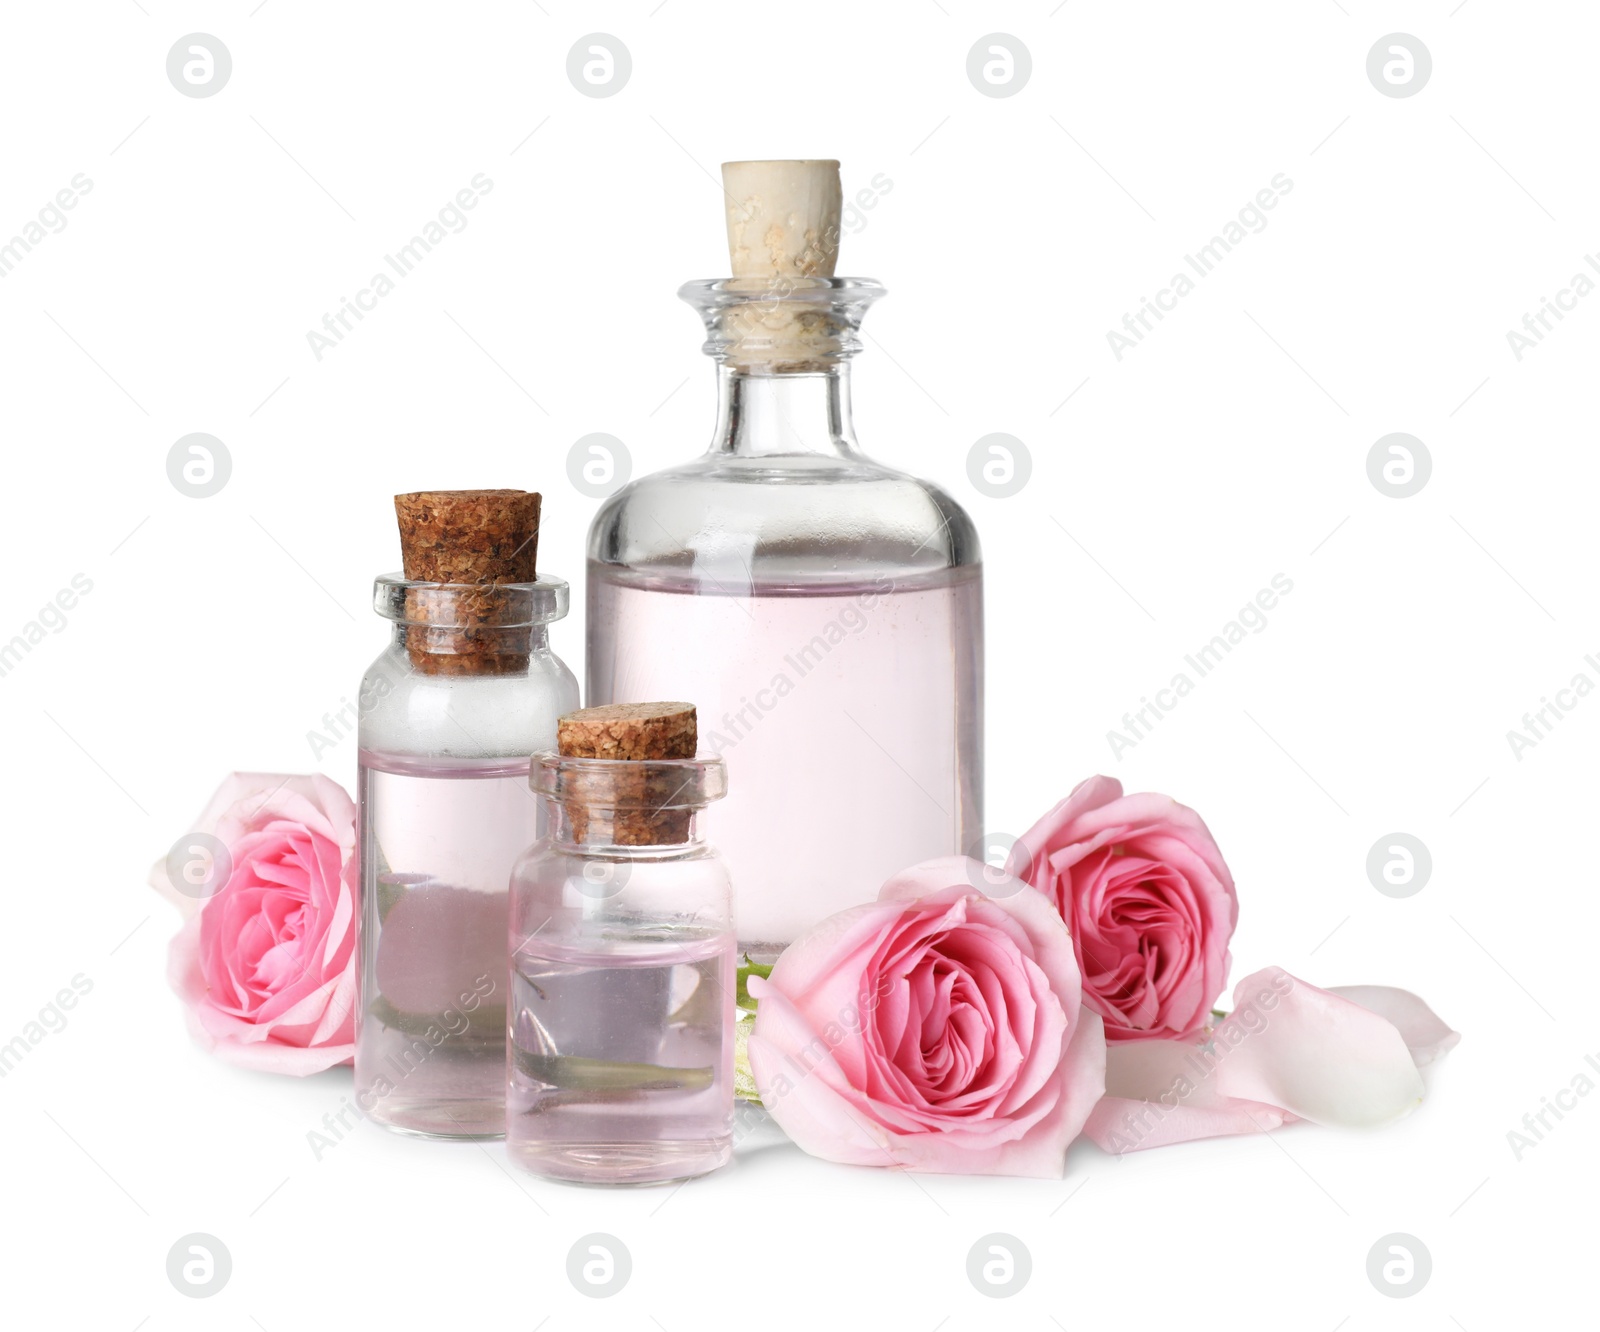 Photo of Bottles with rose essential oil and flowers on white background